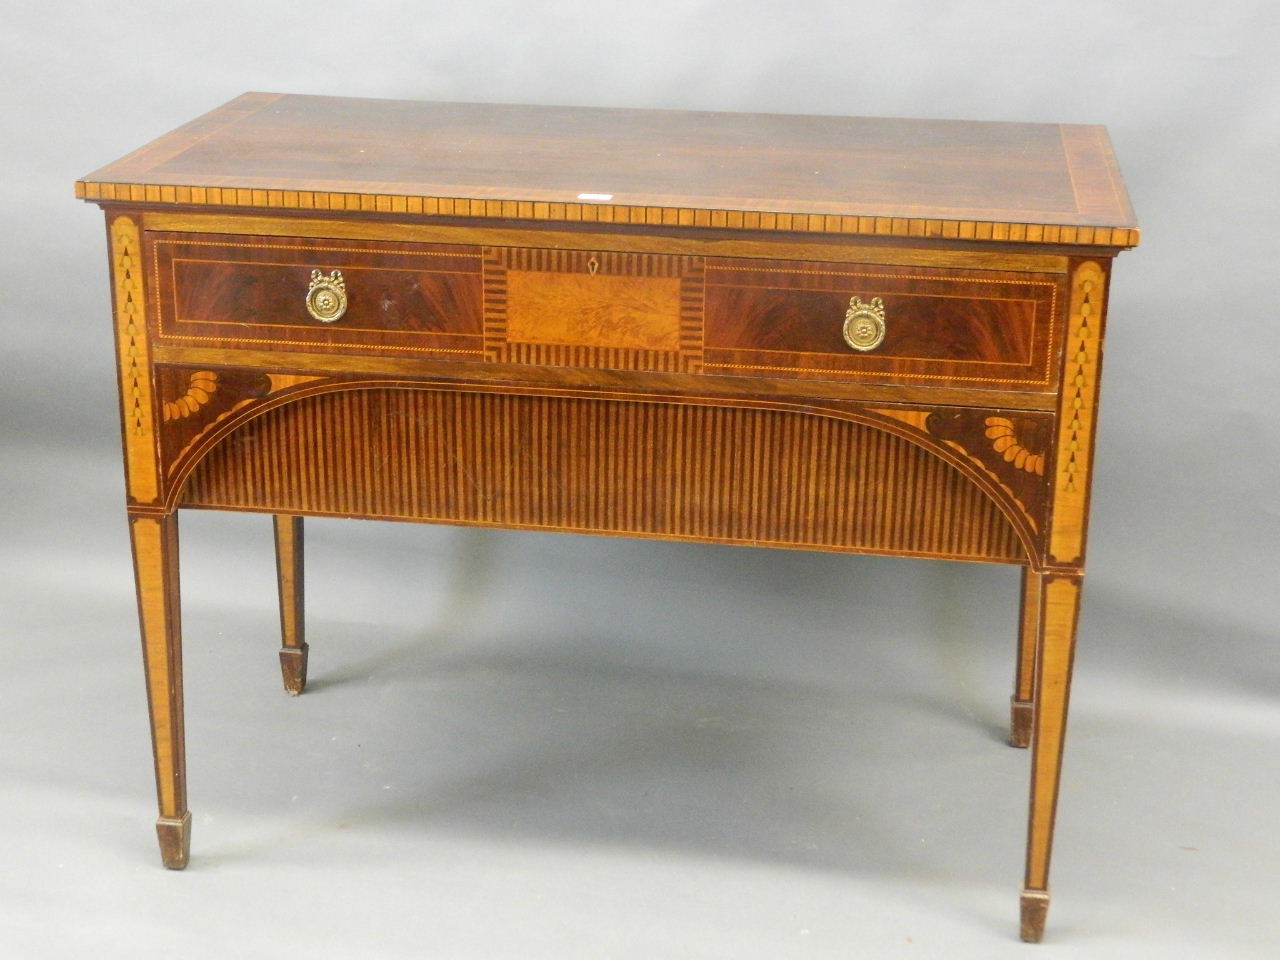 A good C19th mahogany buffet/silver table with fine inlaid decoration, 26" x 50" x 37½" - Image 2 of 5